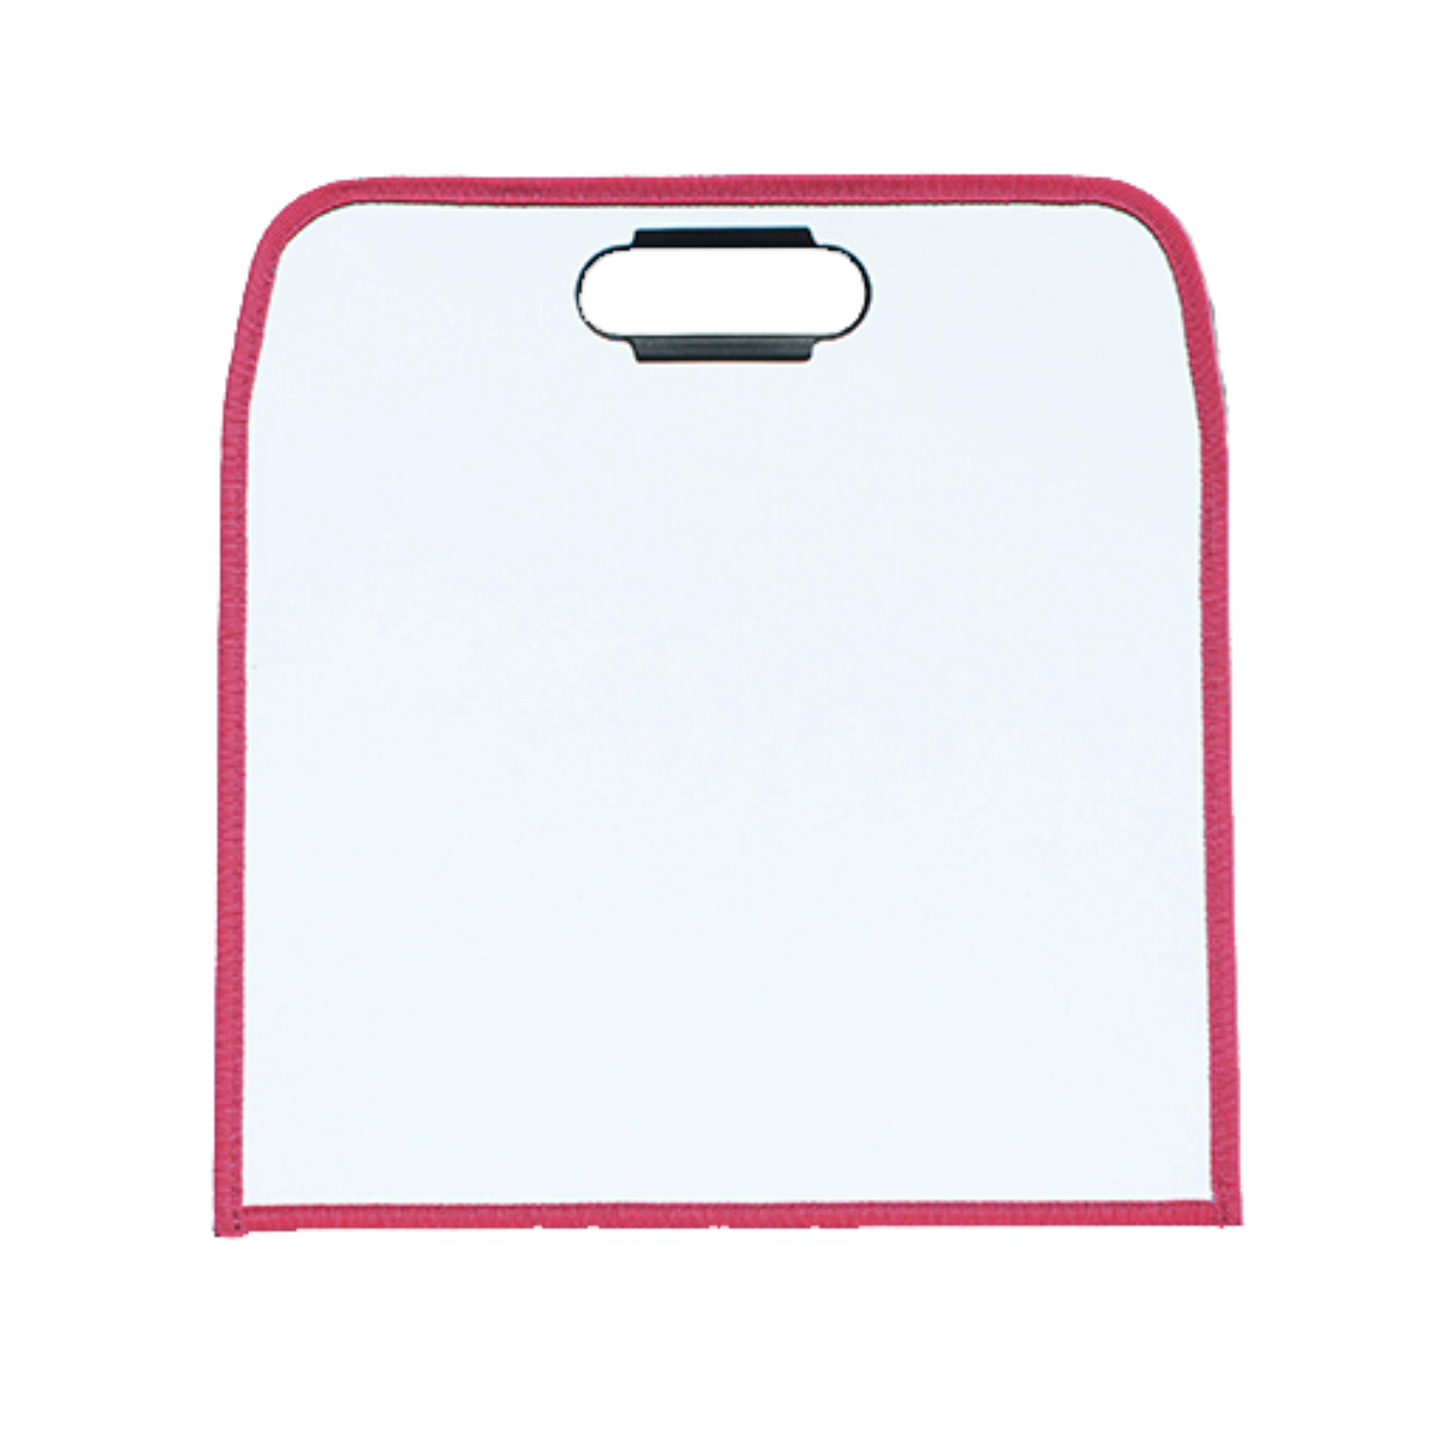 Dry Erase Pad with Handle